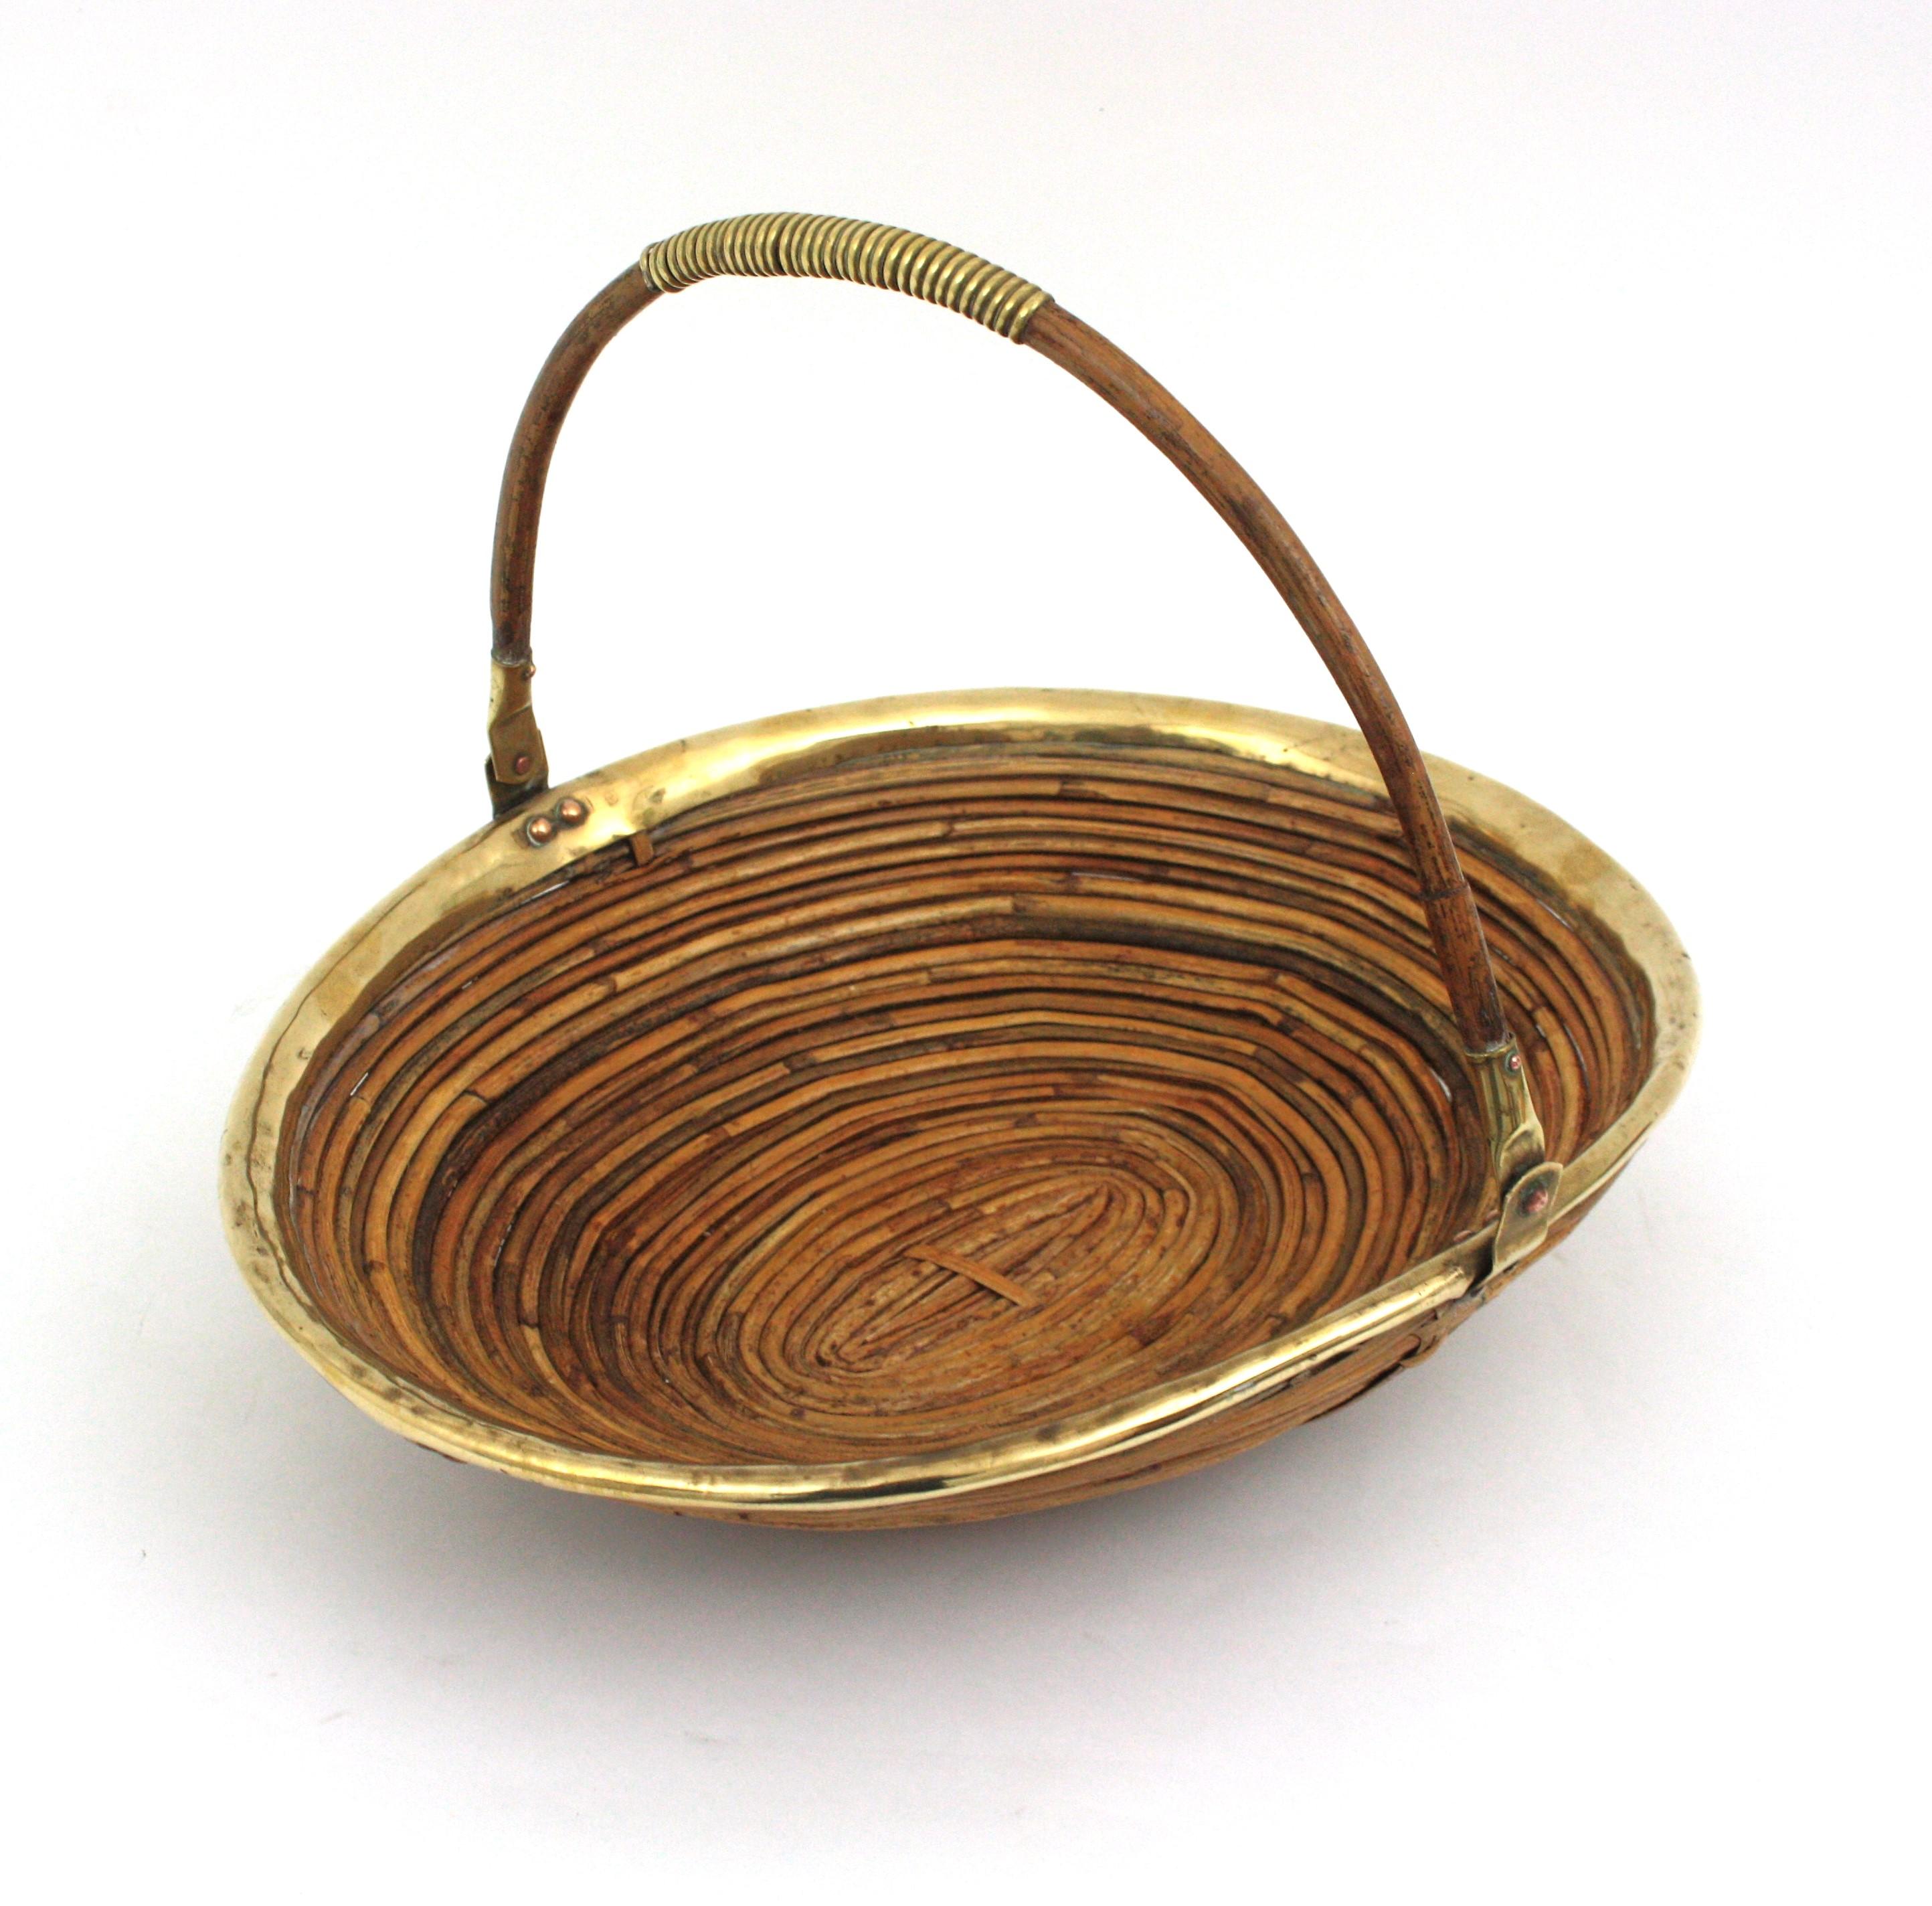 Mid-Century Modern brass and bamboo / rattan large conical basket bowl with a single handle. Handcrafted in Italy, 1970s. 
It has a brass trim covering the top and brass detailings at the handle. Inspired on Gabriella Crespi designs.
Use it as fruit